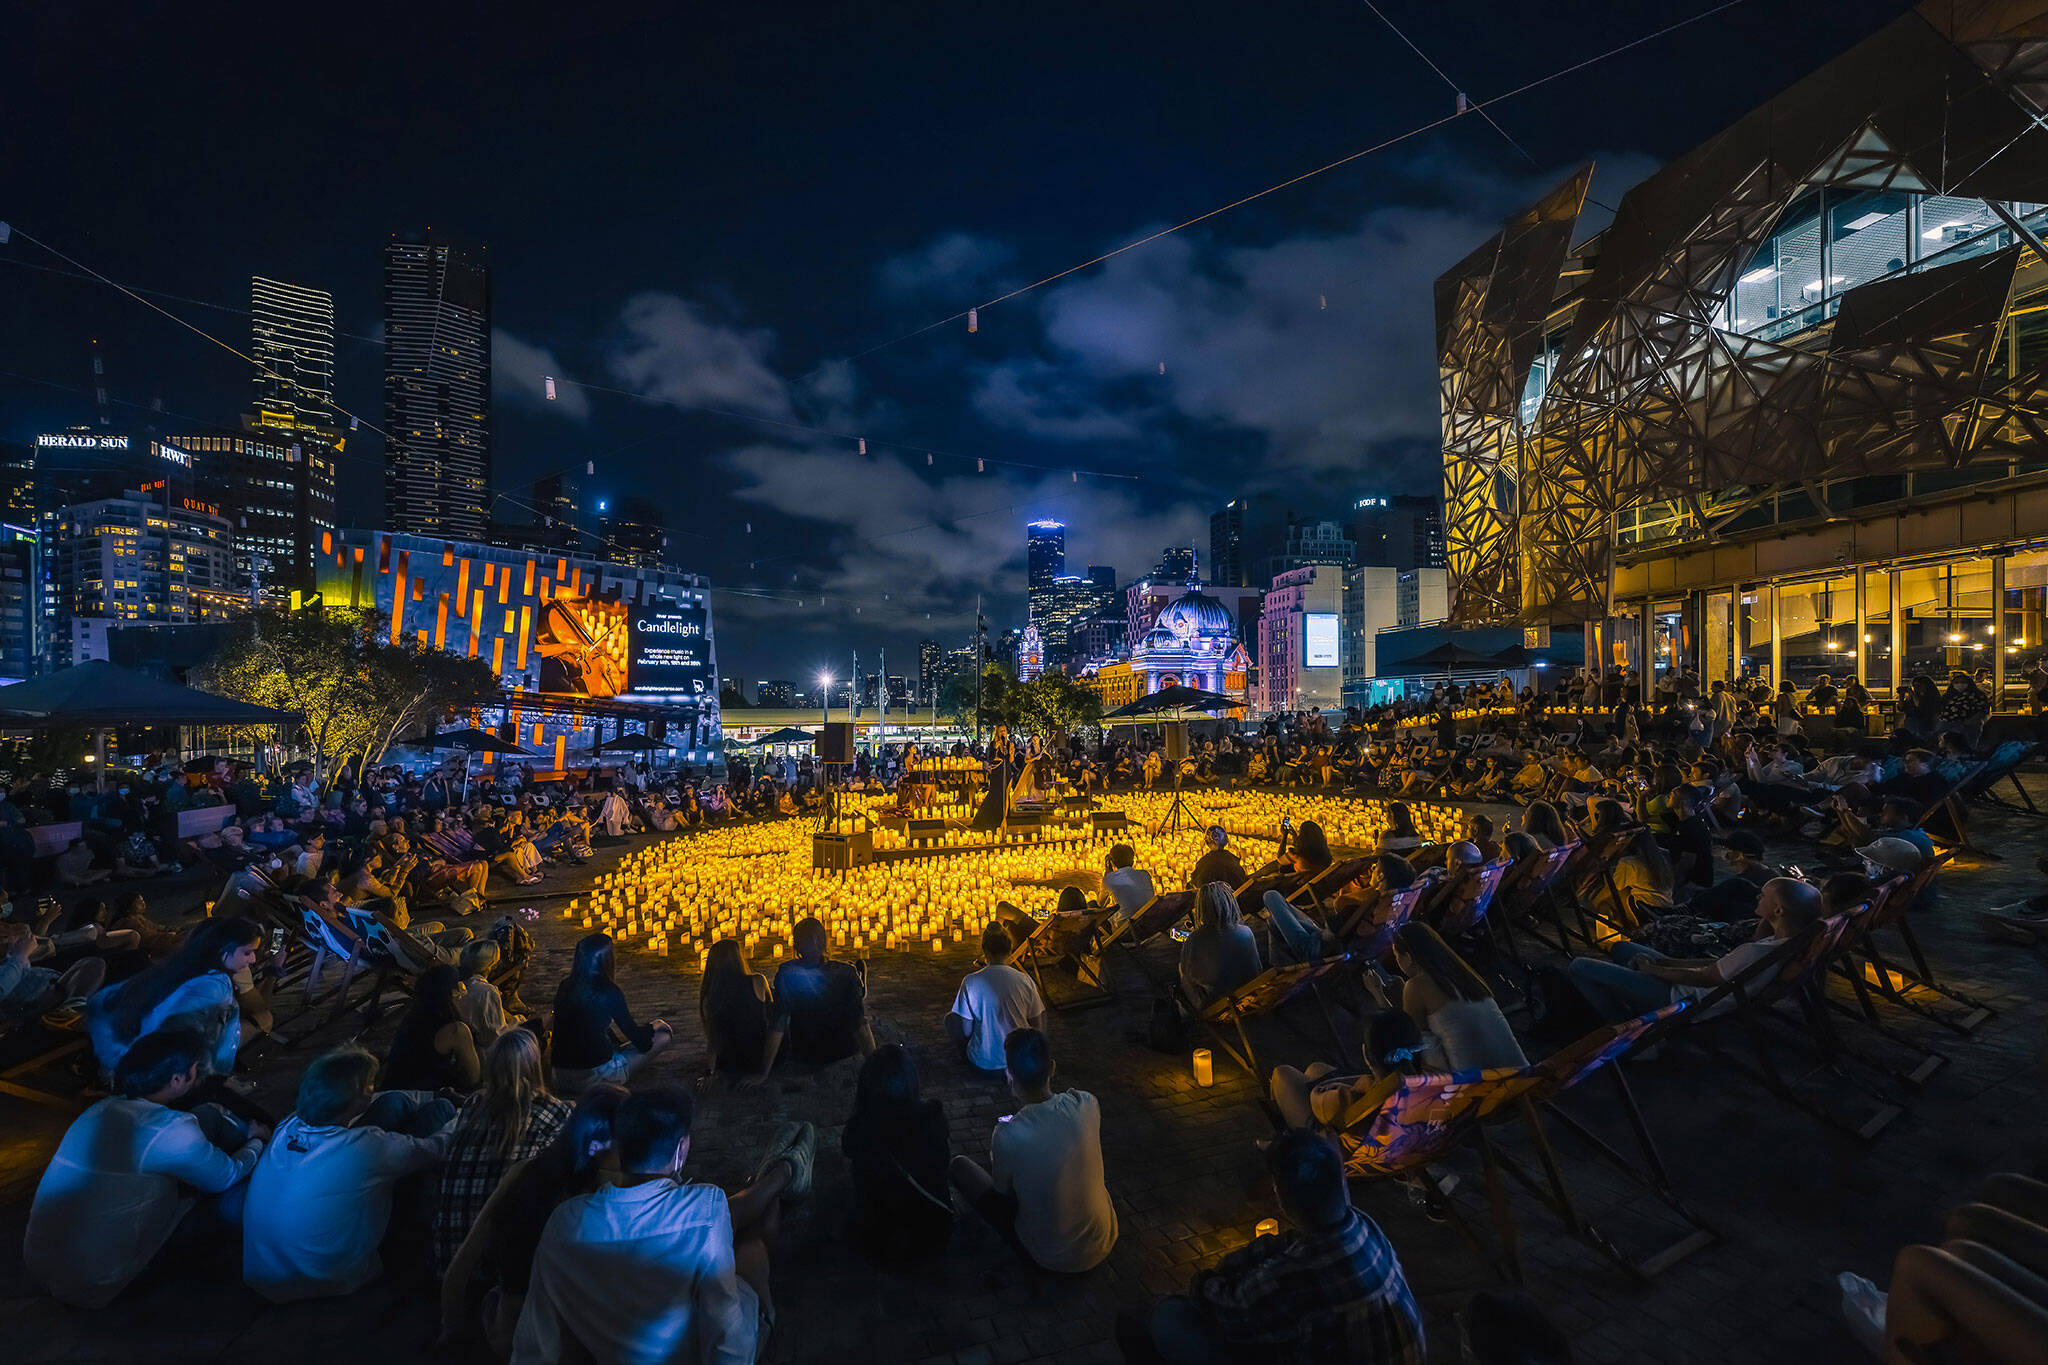 Outdoor candlelight concert series is coming to Toronto as part of